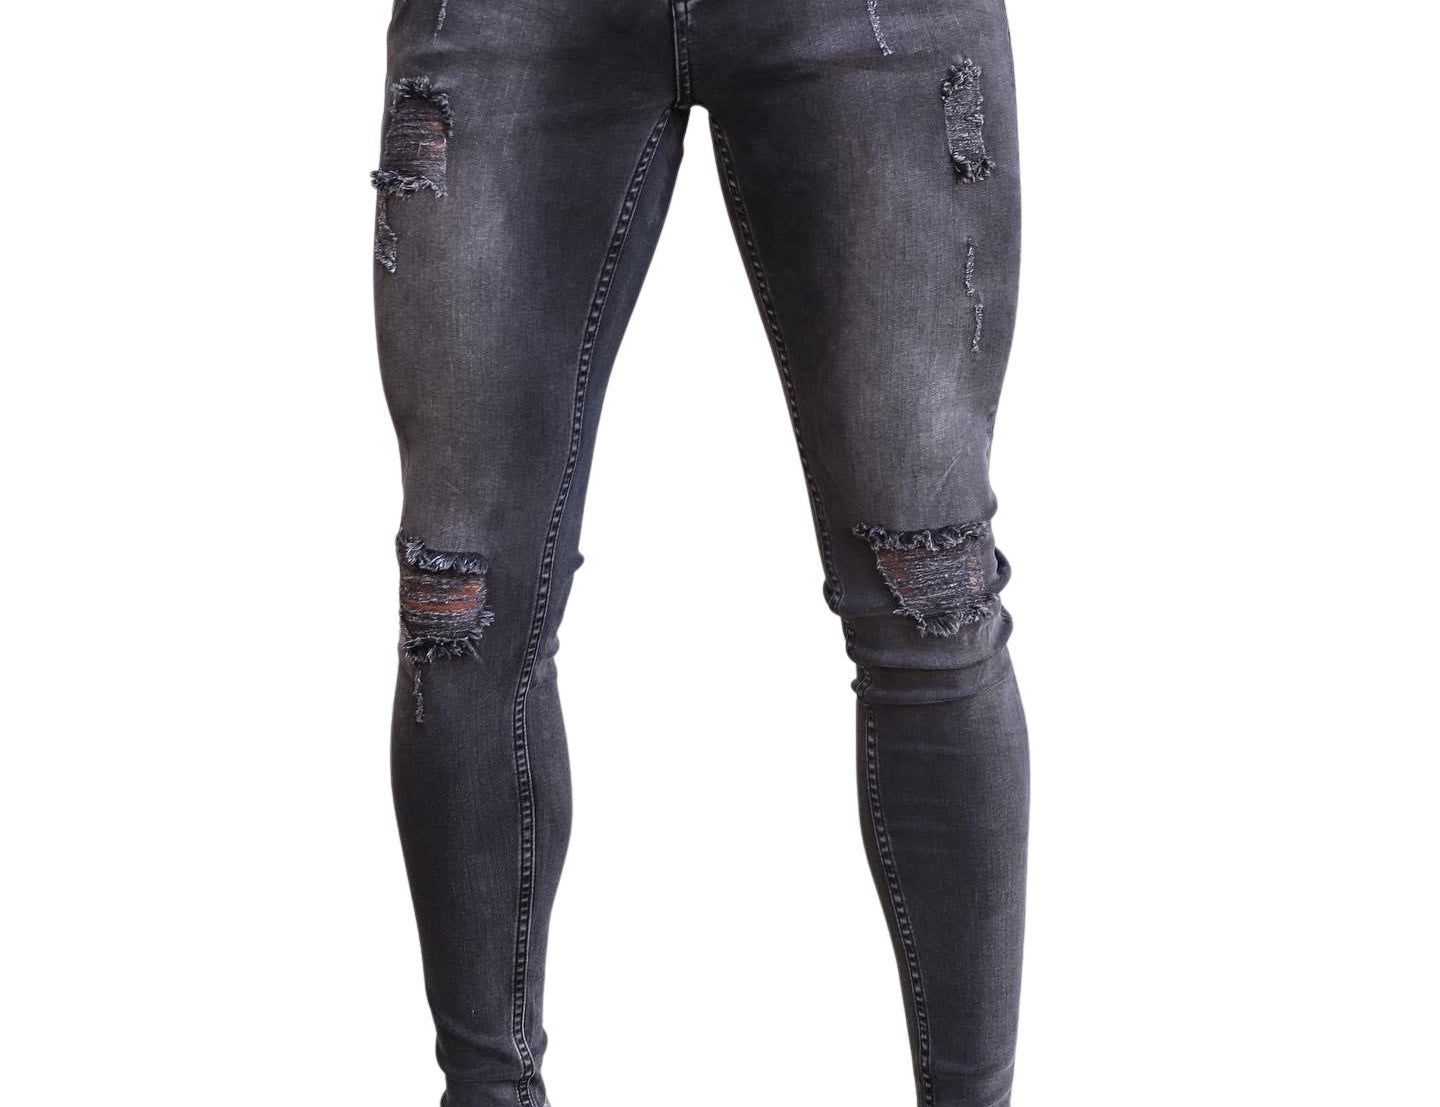 Spotless Mind - Grey Skinny Jeans for Men - Sarman Fashion - Wholesale Clothing Fashion Brand for Men from Canada